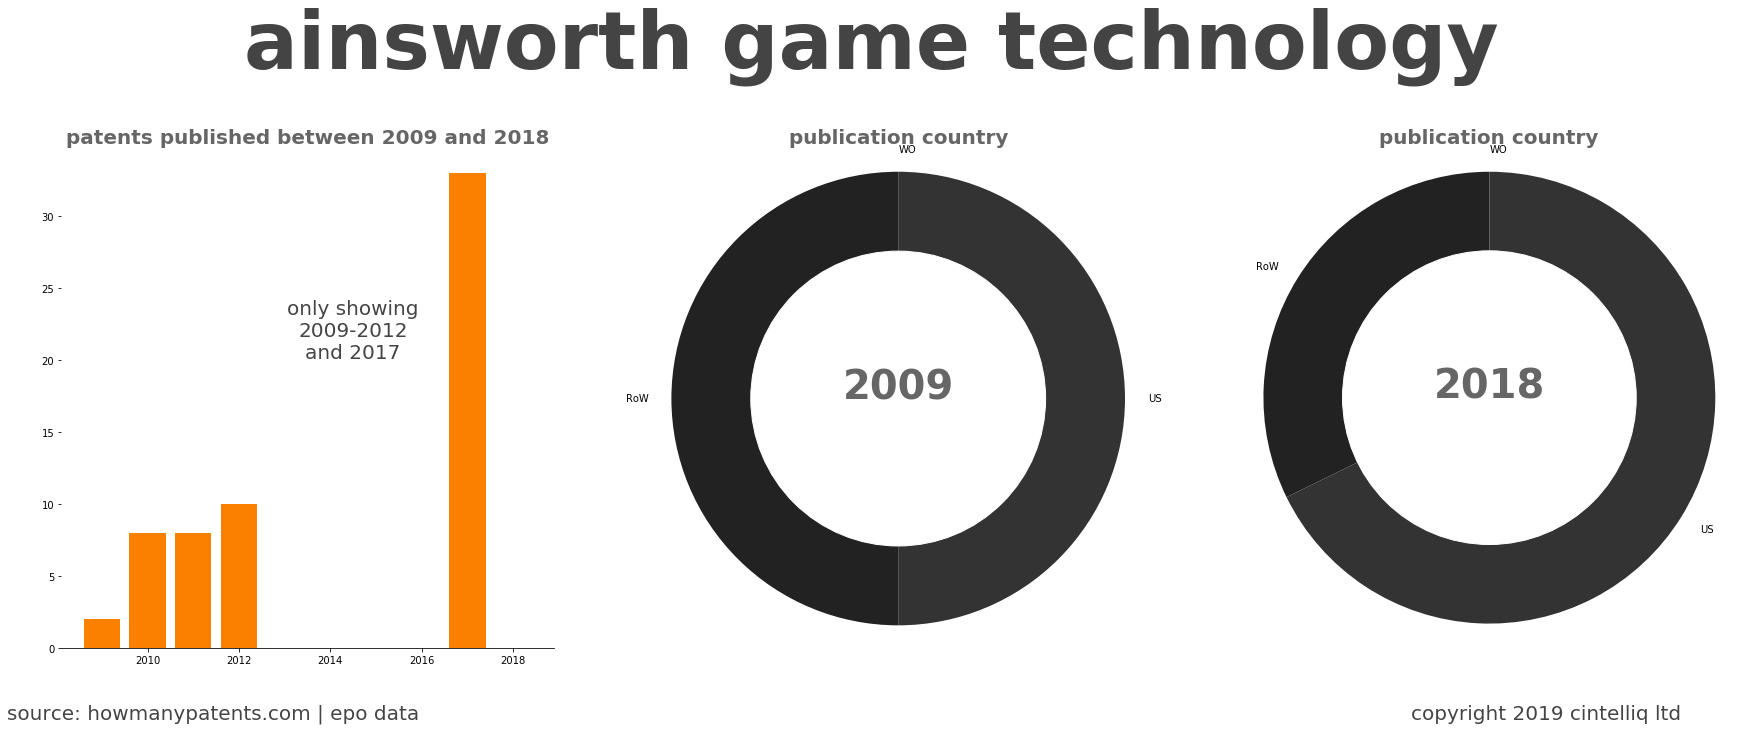 summary of patents for Ainsworth Game Technology